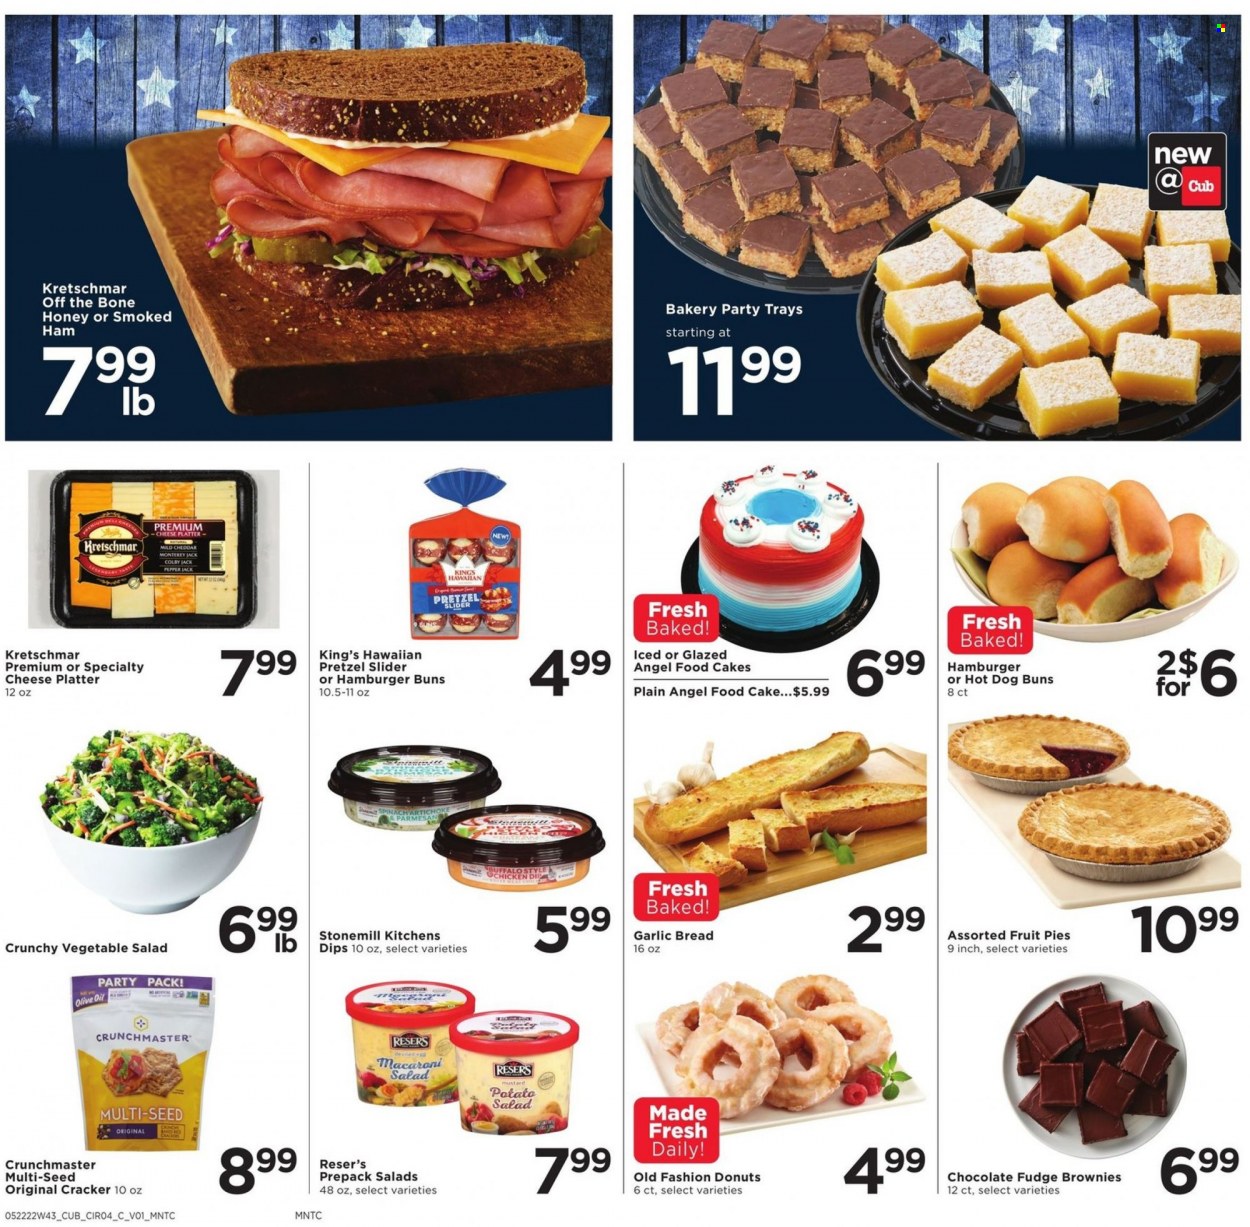 thumbnail - Cub Foods Flyer - 05/22/2022 - 05/28/2022 - Sales products - bread, pretzels, cake, buns, burger buns, brownies, donut, Angel Food, salad, ham, smoked ham, potato salad, macaroni salad, Colby cheese, mild cheddar, Monterey Jack cheese, cheddar, parmesan, cheese, dip, fudge, chocolate, crackers, mustard, olive oil, oil. Page 4.